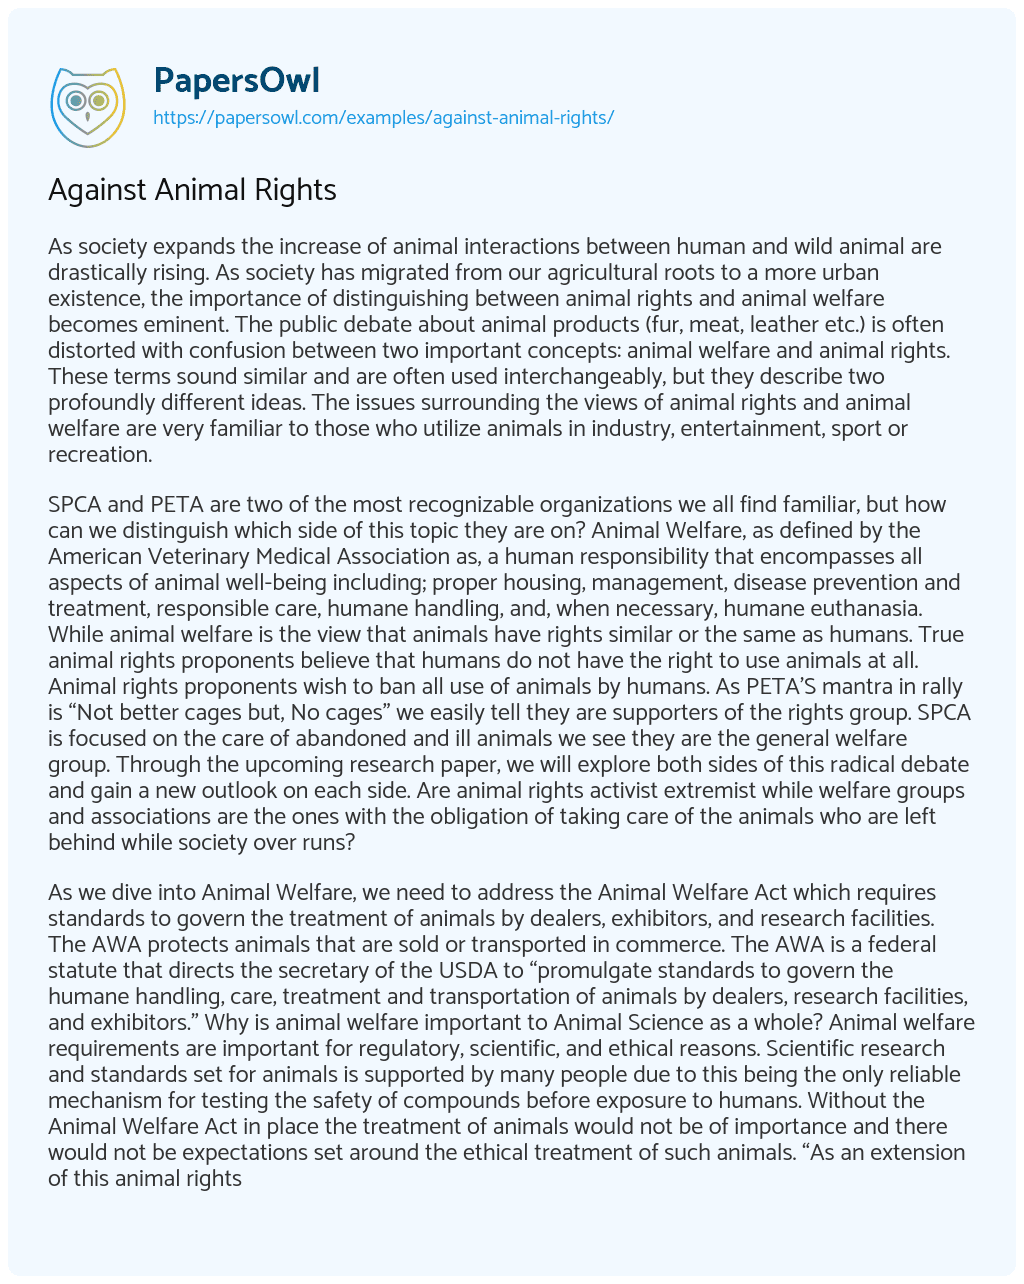 Essay on Against Animal Rights